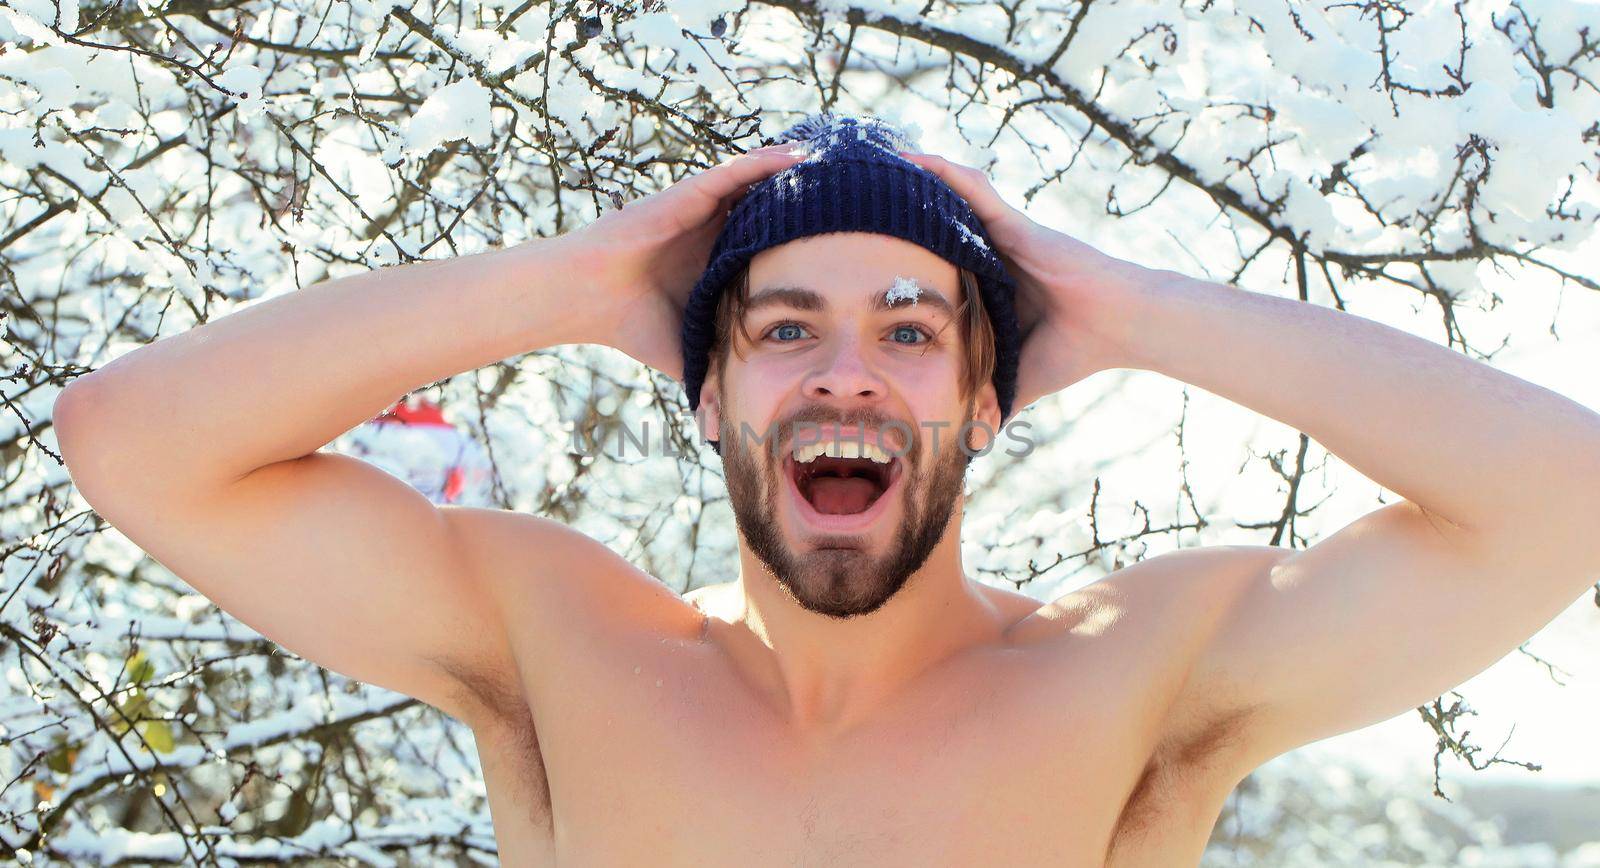 Excited young man or sexy muscular guy with bare torso and chest on fit body in winter park outdoor.